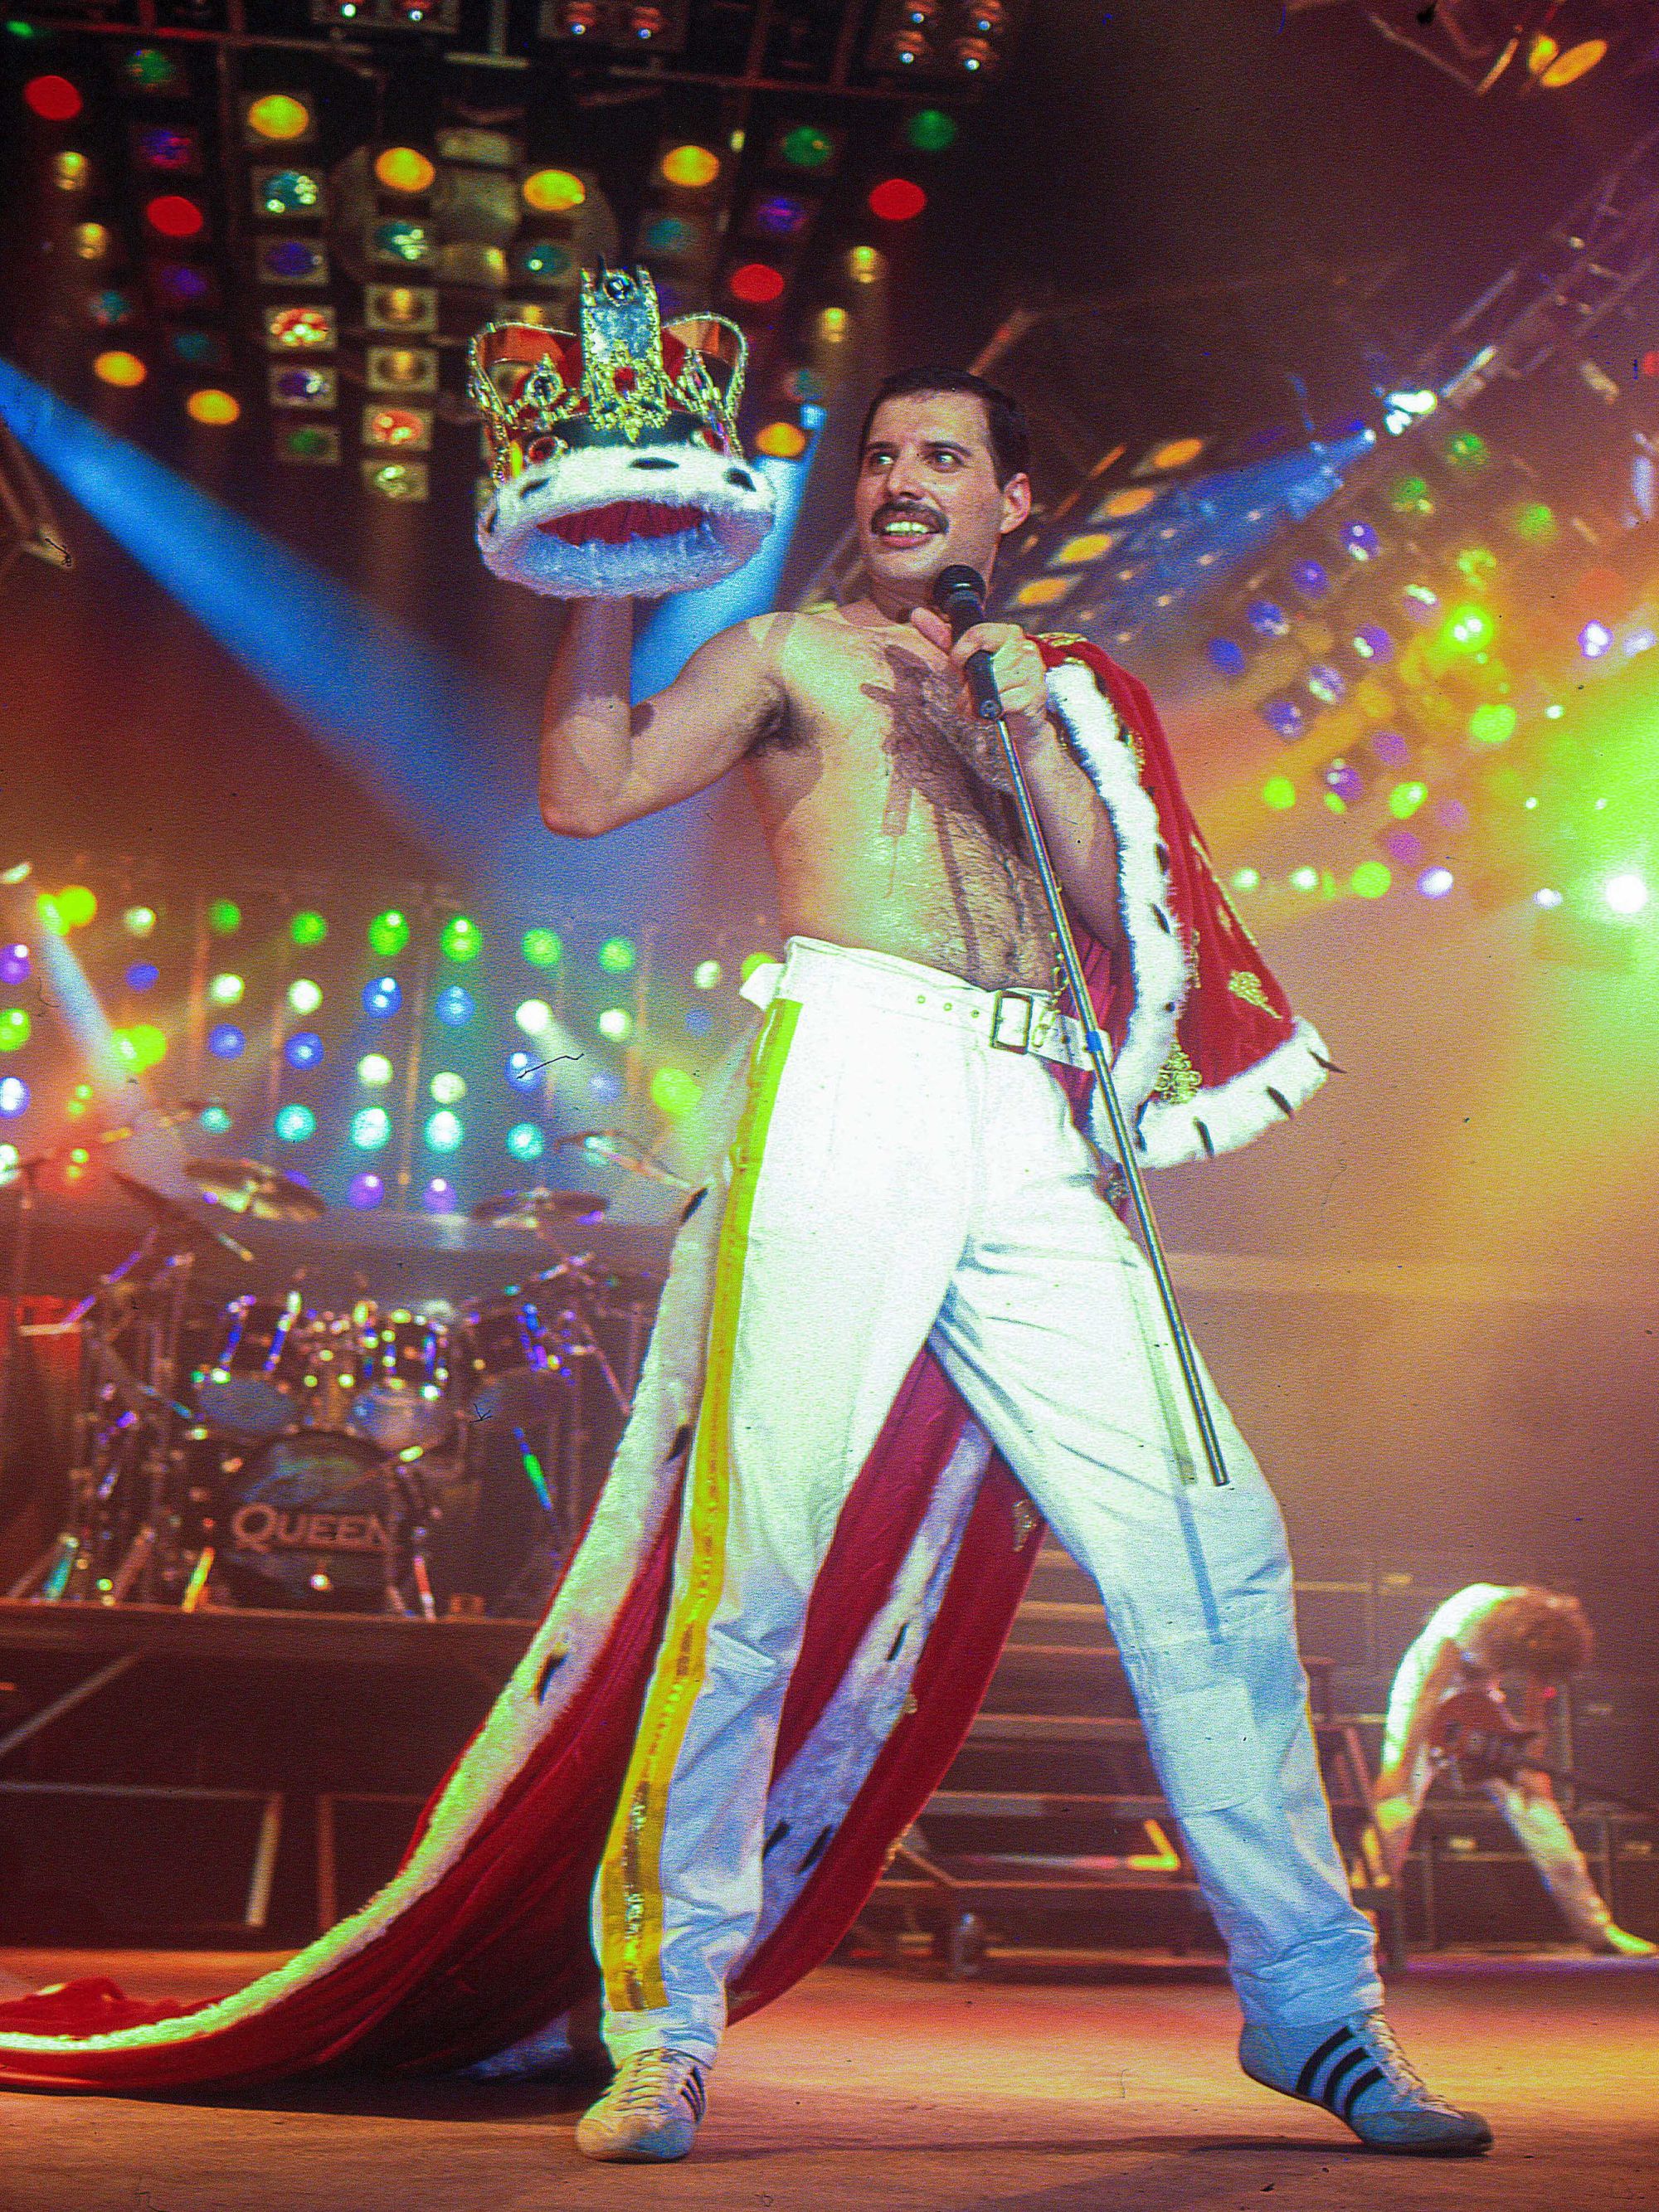 Rock legend Freddie Mercury's personal possessions are going up